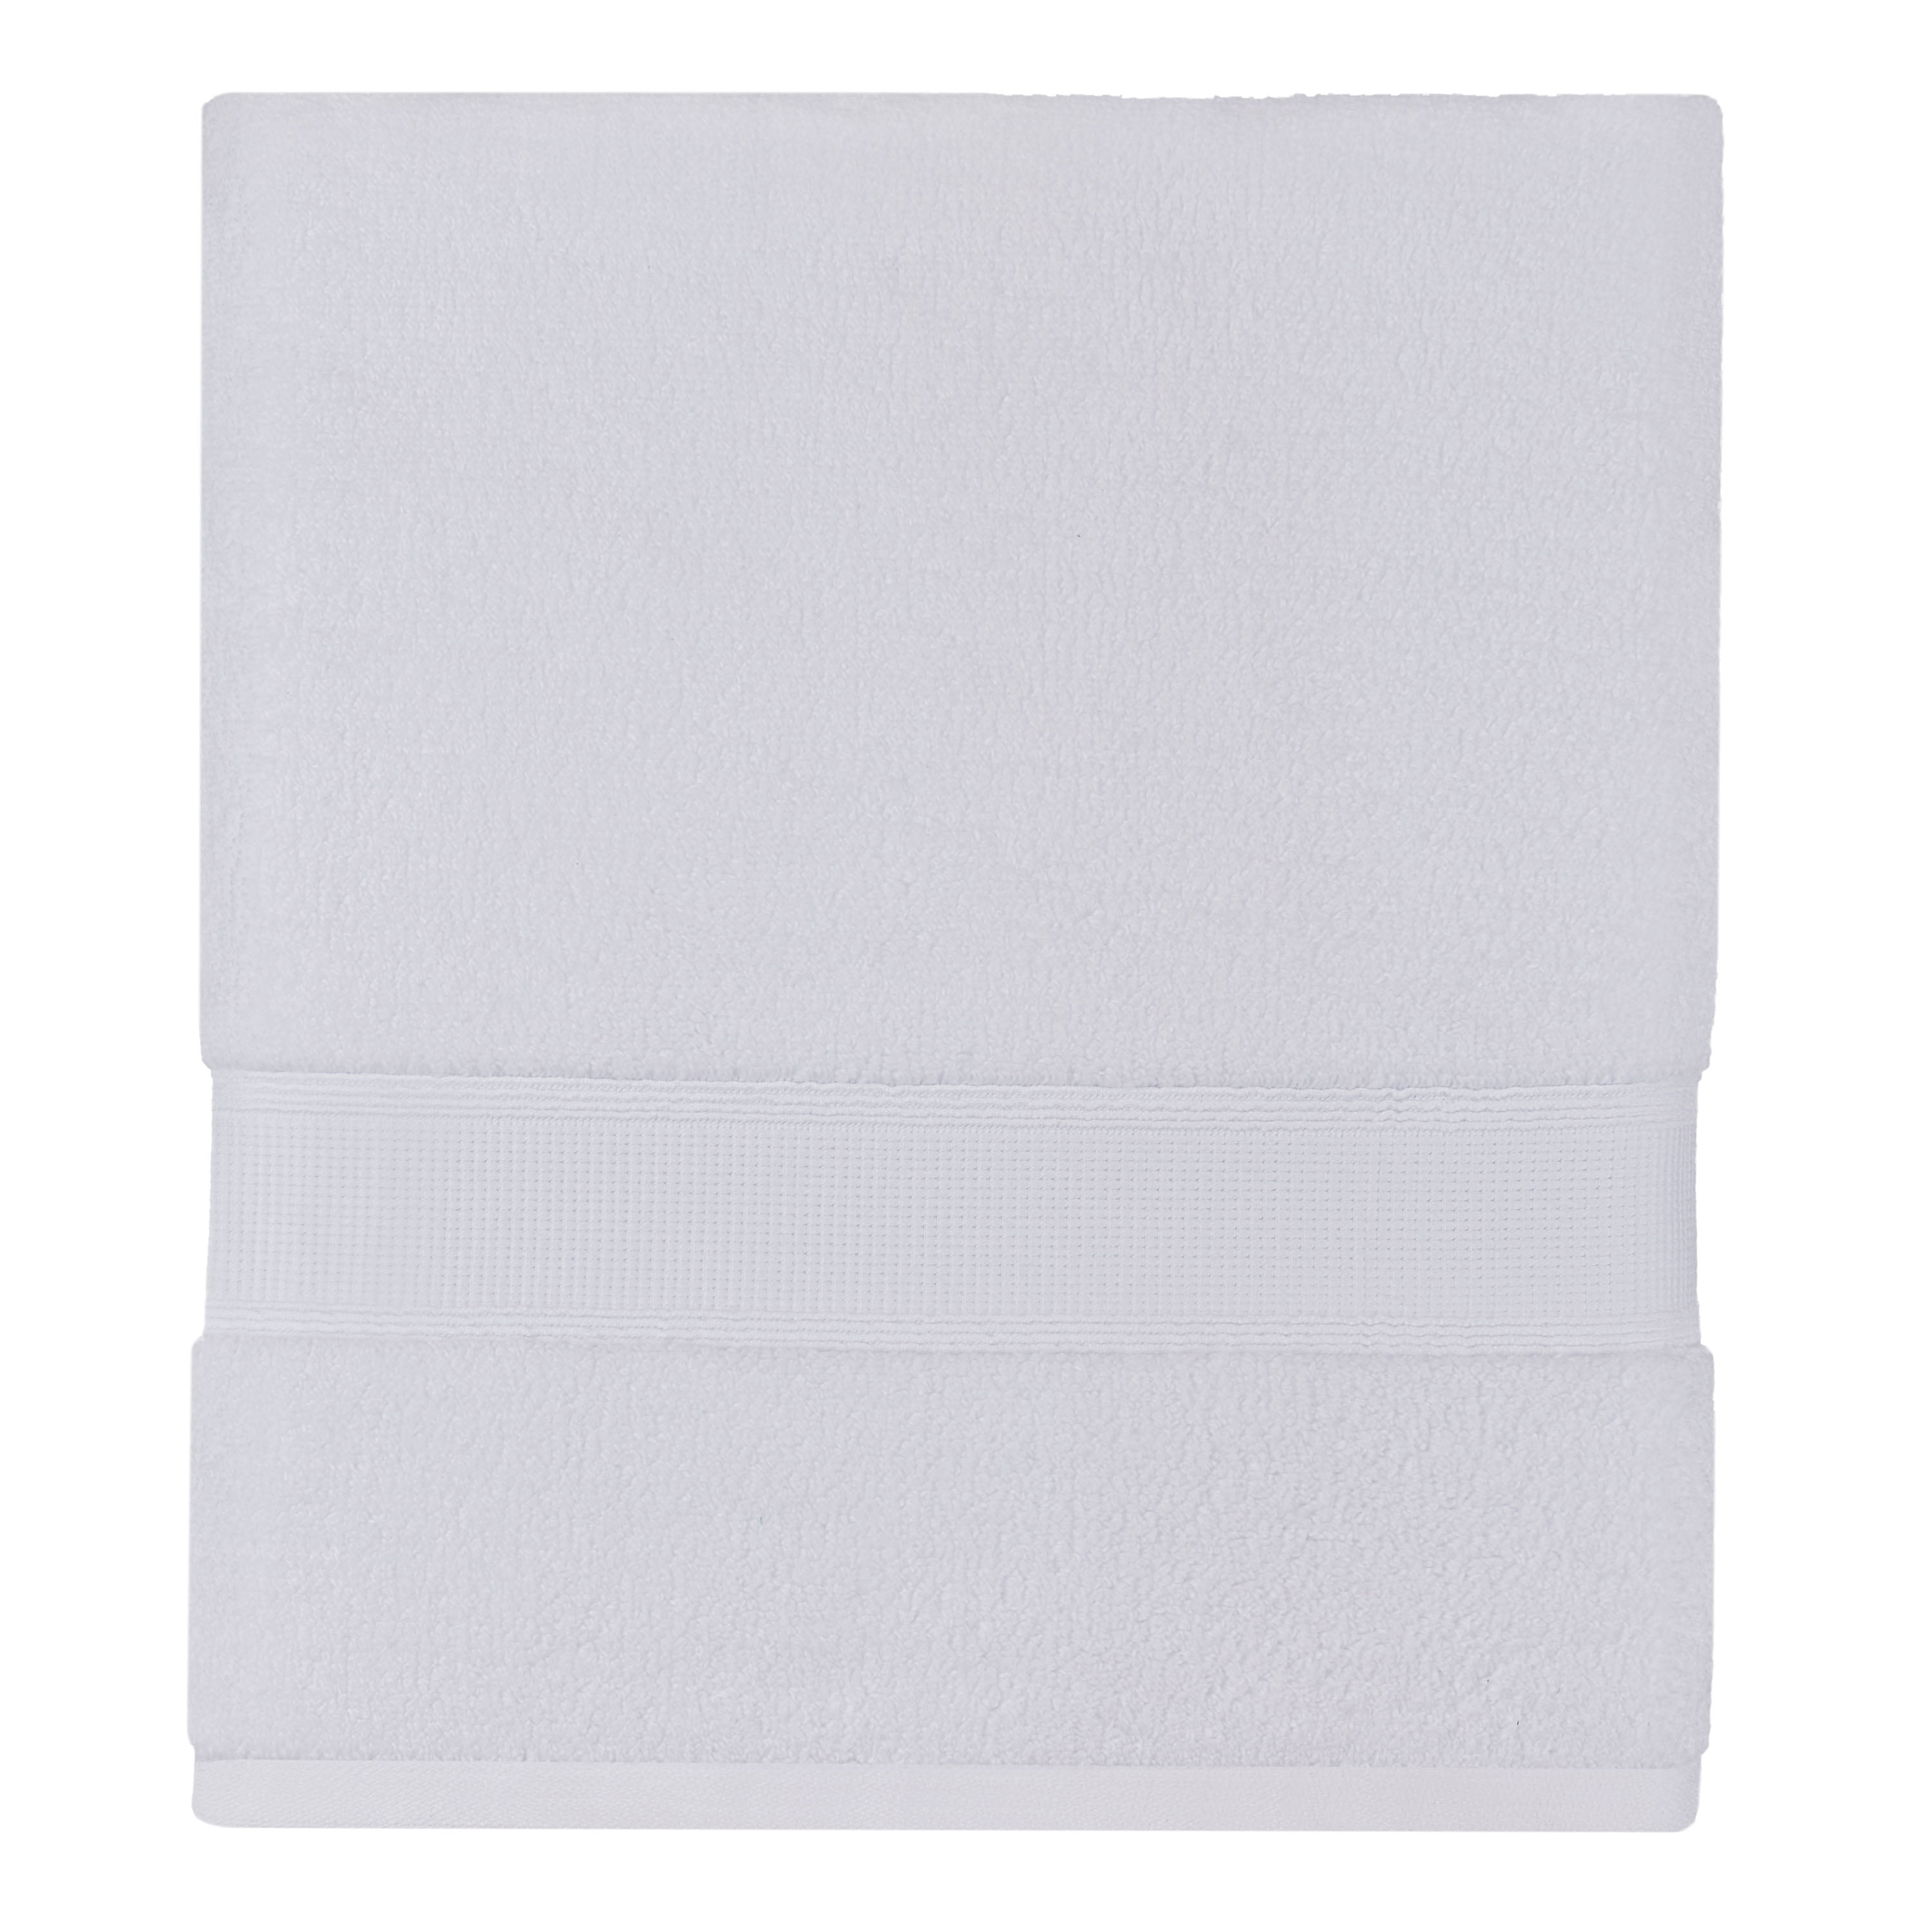 Hotel Style Egyptian Cotton Hand Towel, Arctic White